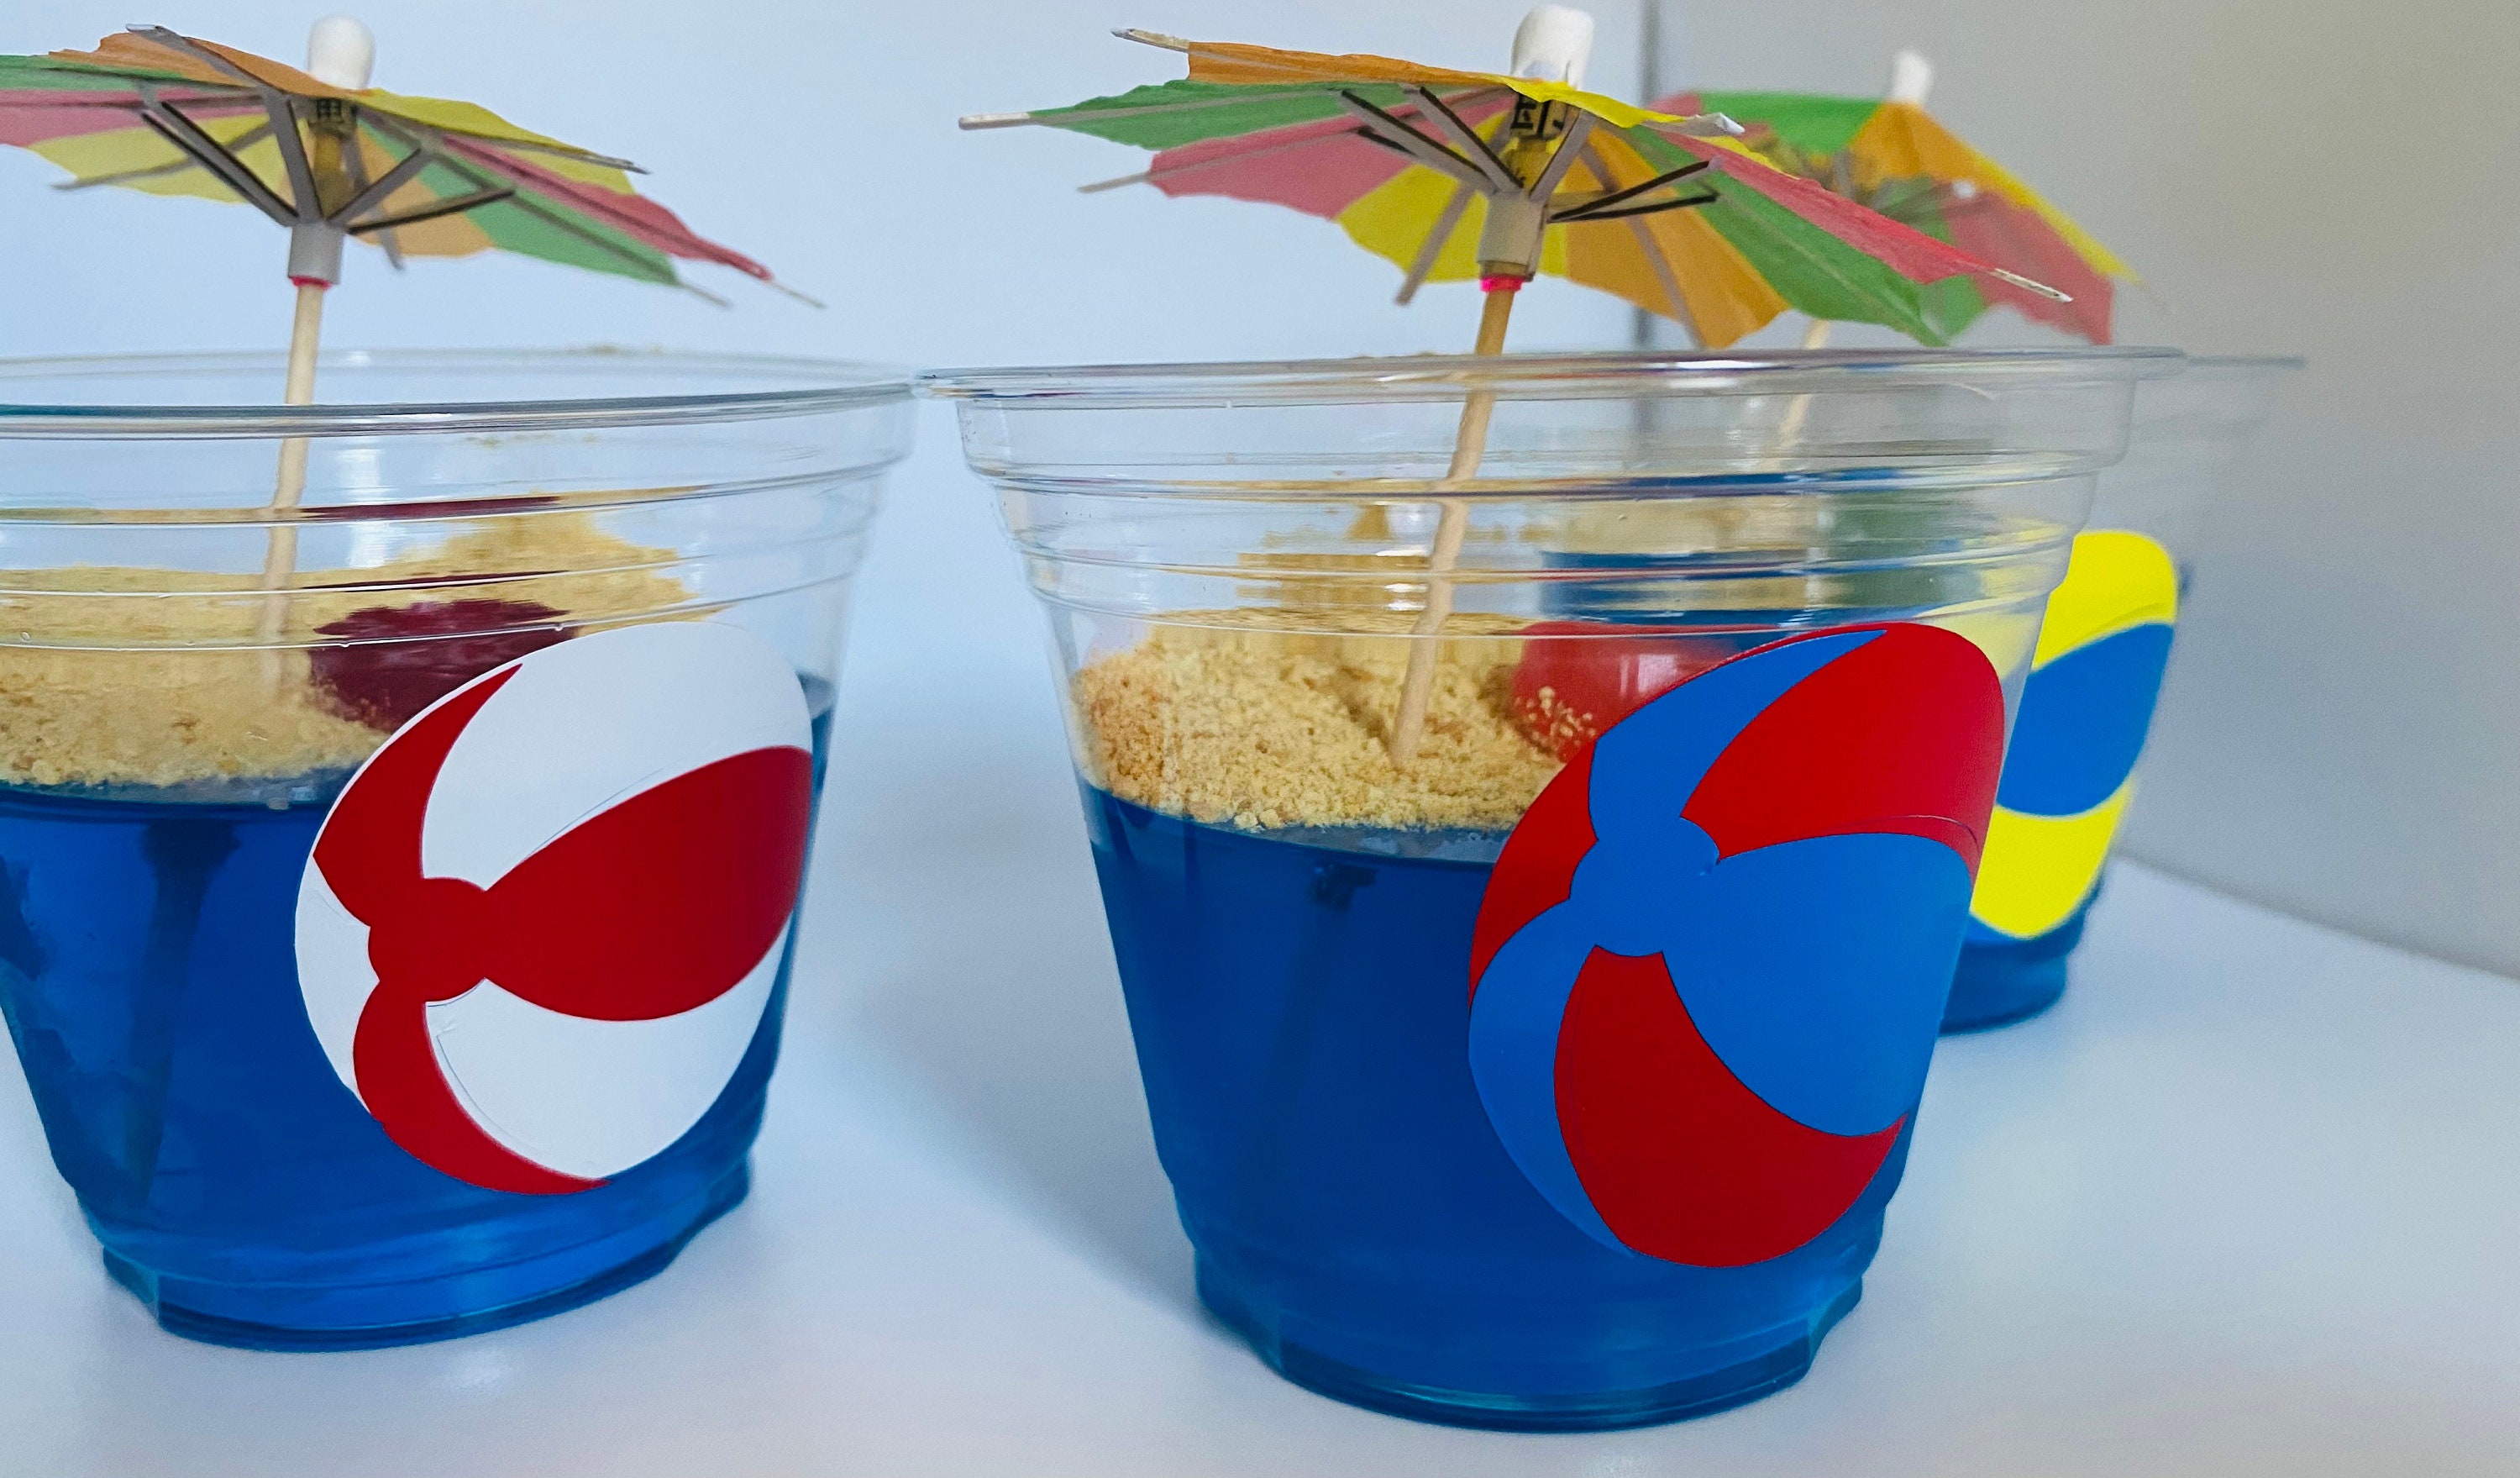 Beach Ball Drink Set / Beach Ball Sip Cups / Beach Pail for Ice Bucket /  Birthday Gift / Mother's Day / Pool Party / Pool Side 